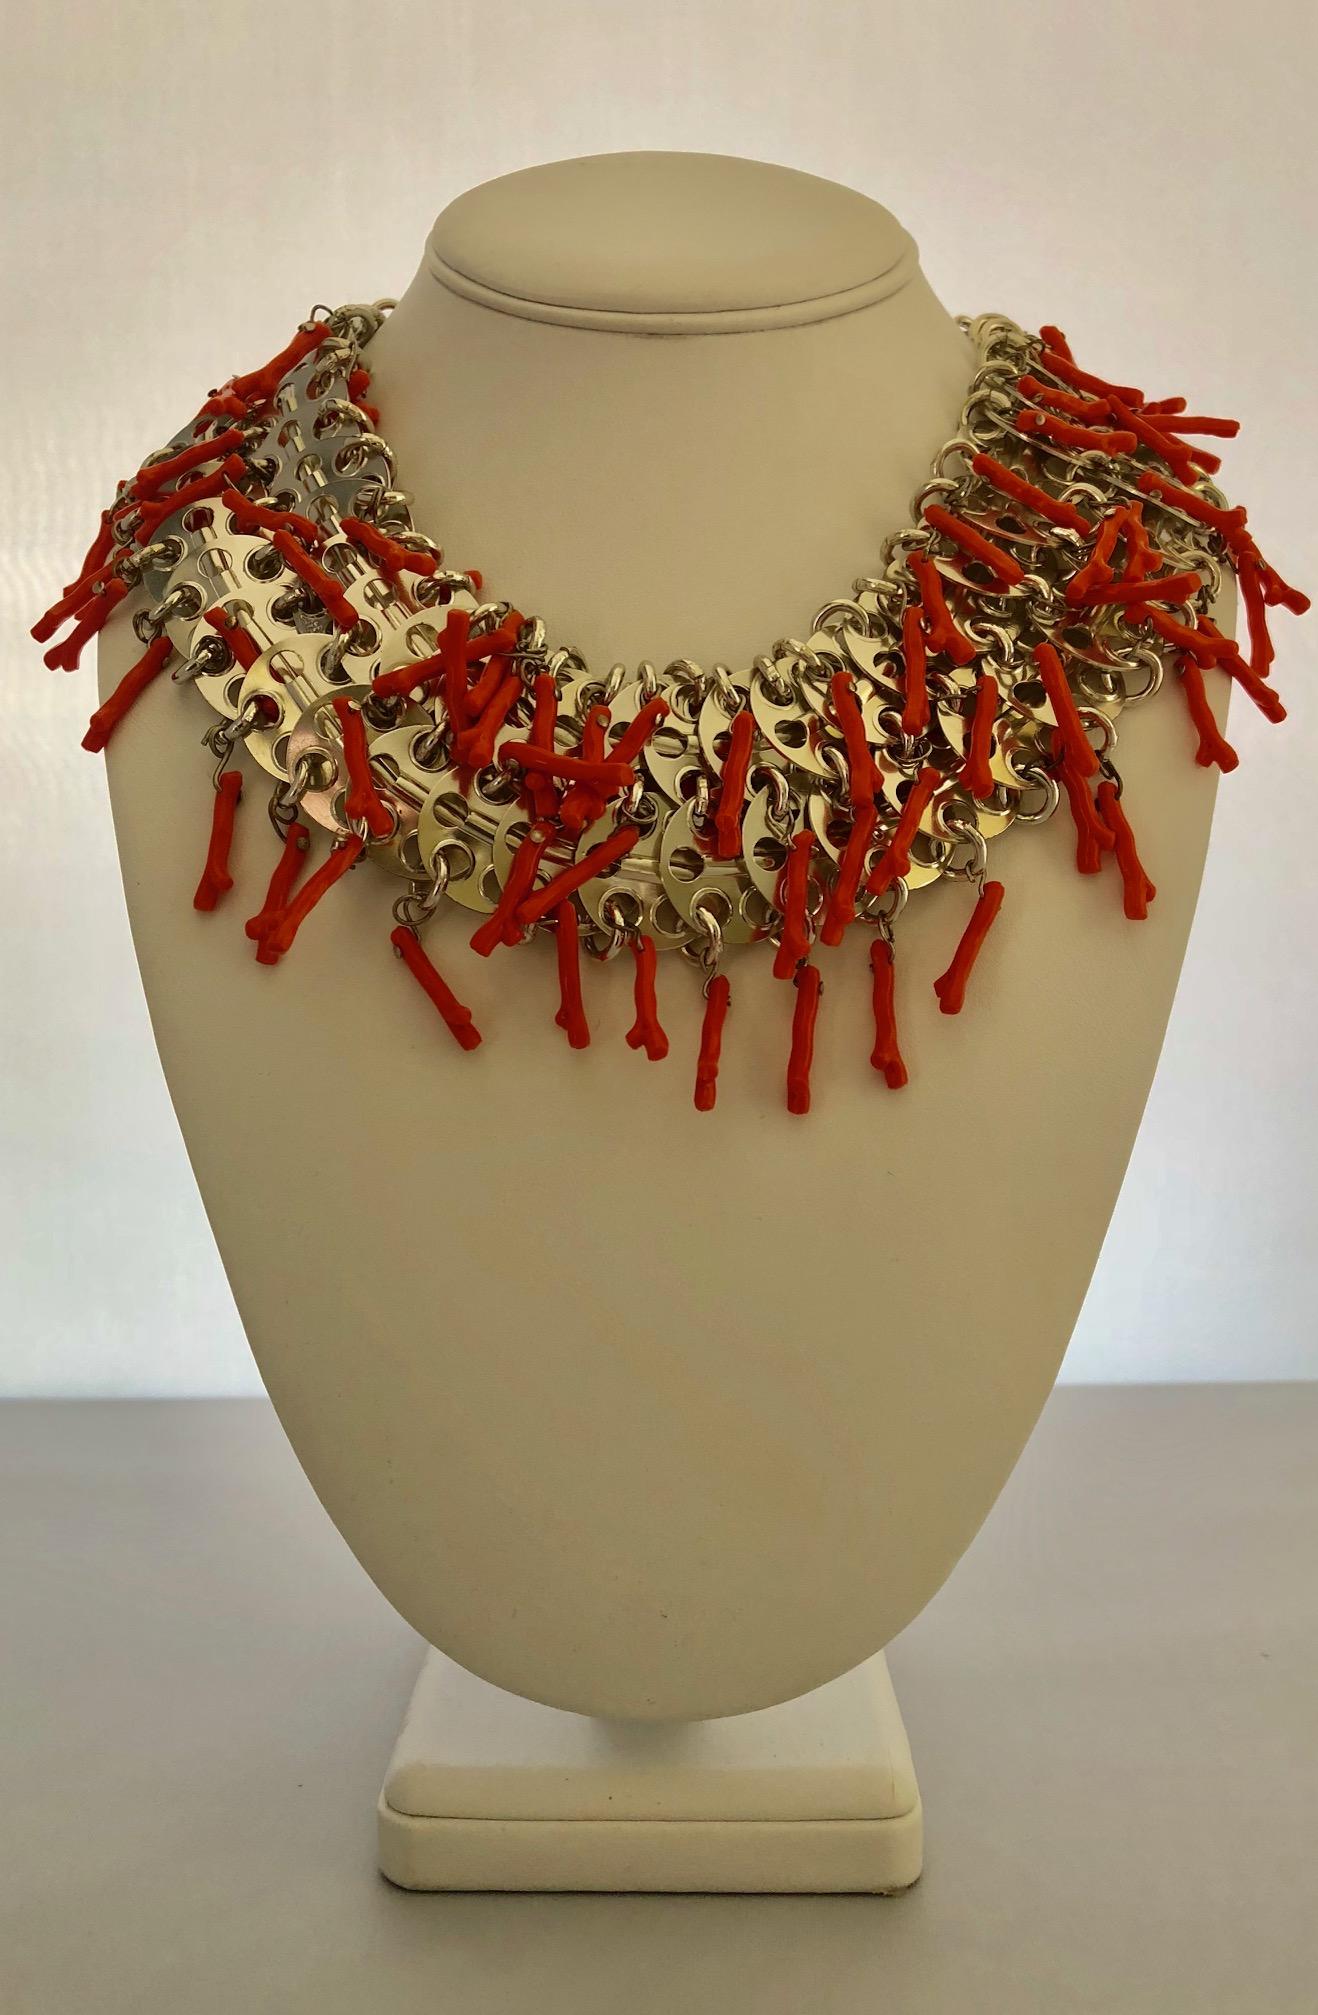  Articulated Architectural Modern Coral  Statement Bib Necklace, Italy 1960s 1